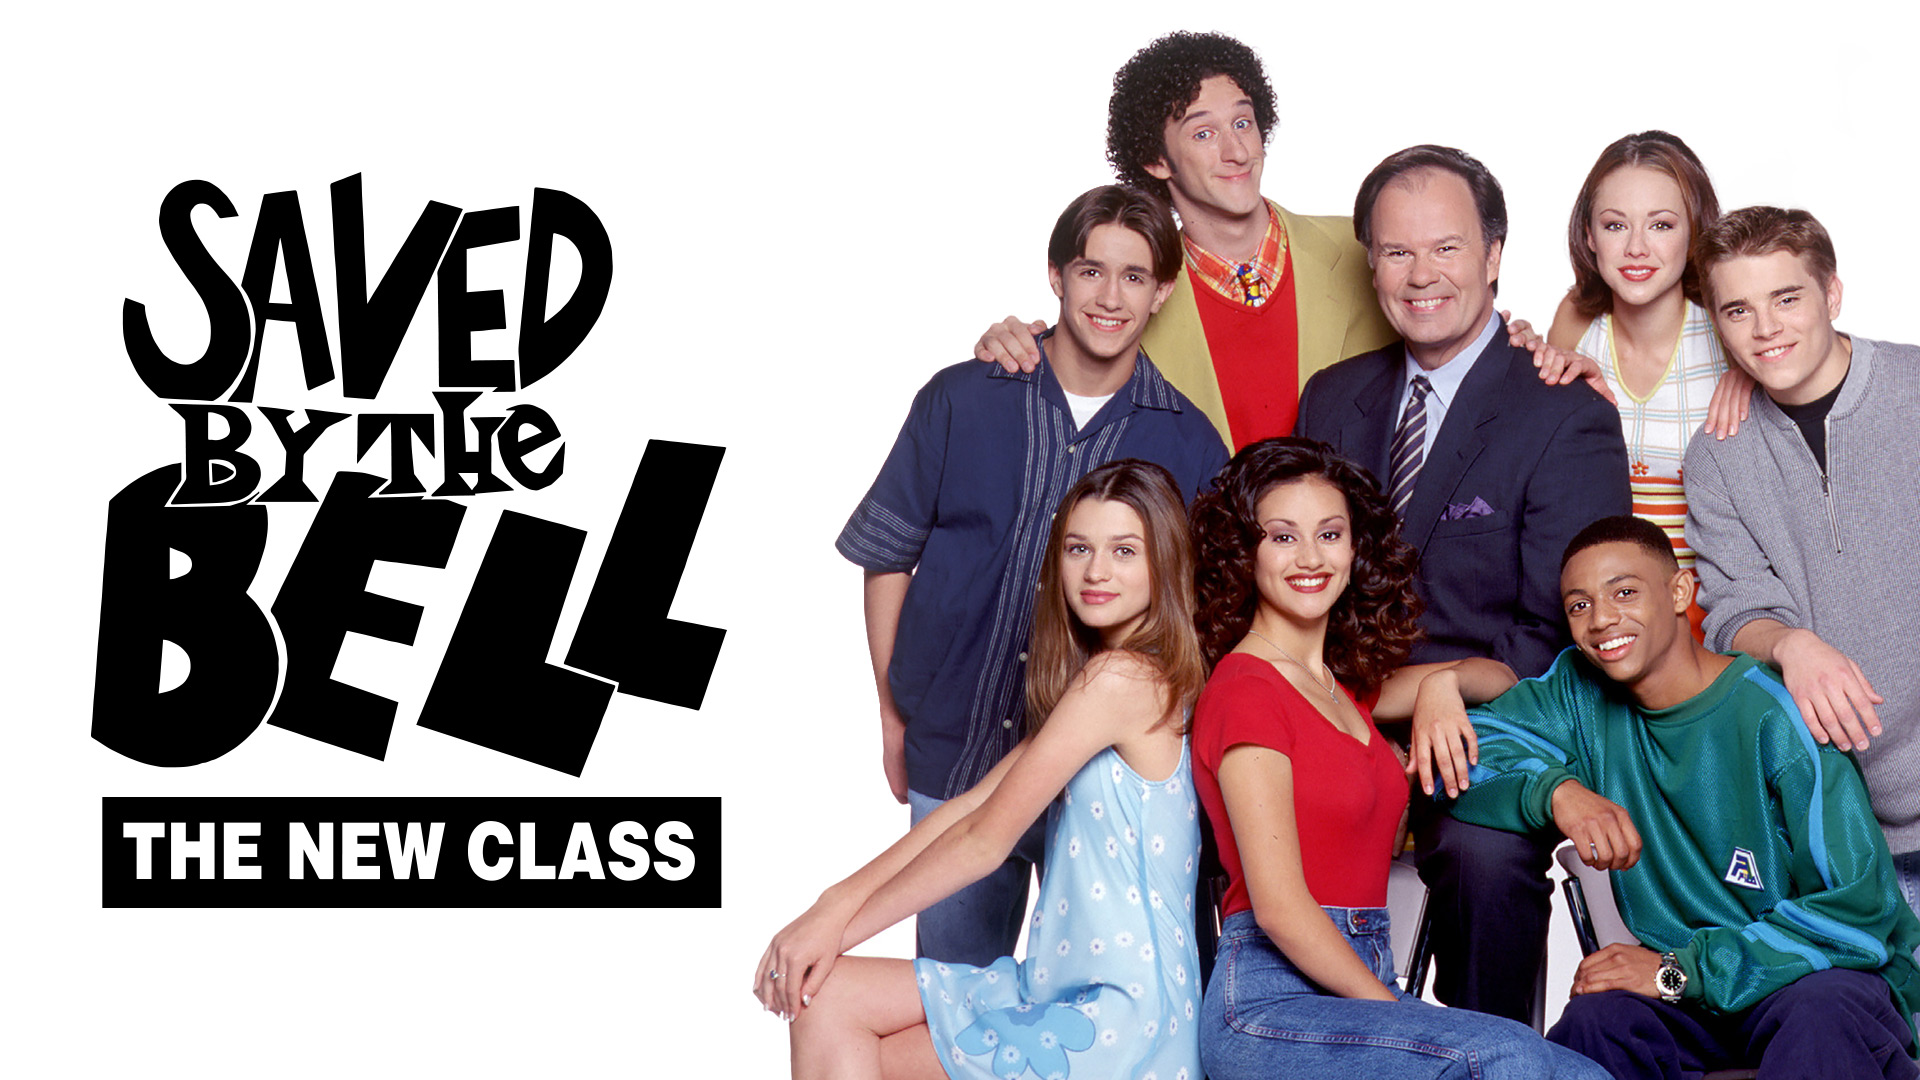 Saved by the Bell: The New Class Season 2 Episodes at NBC.com